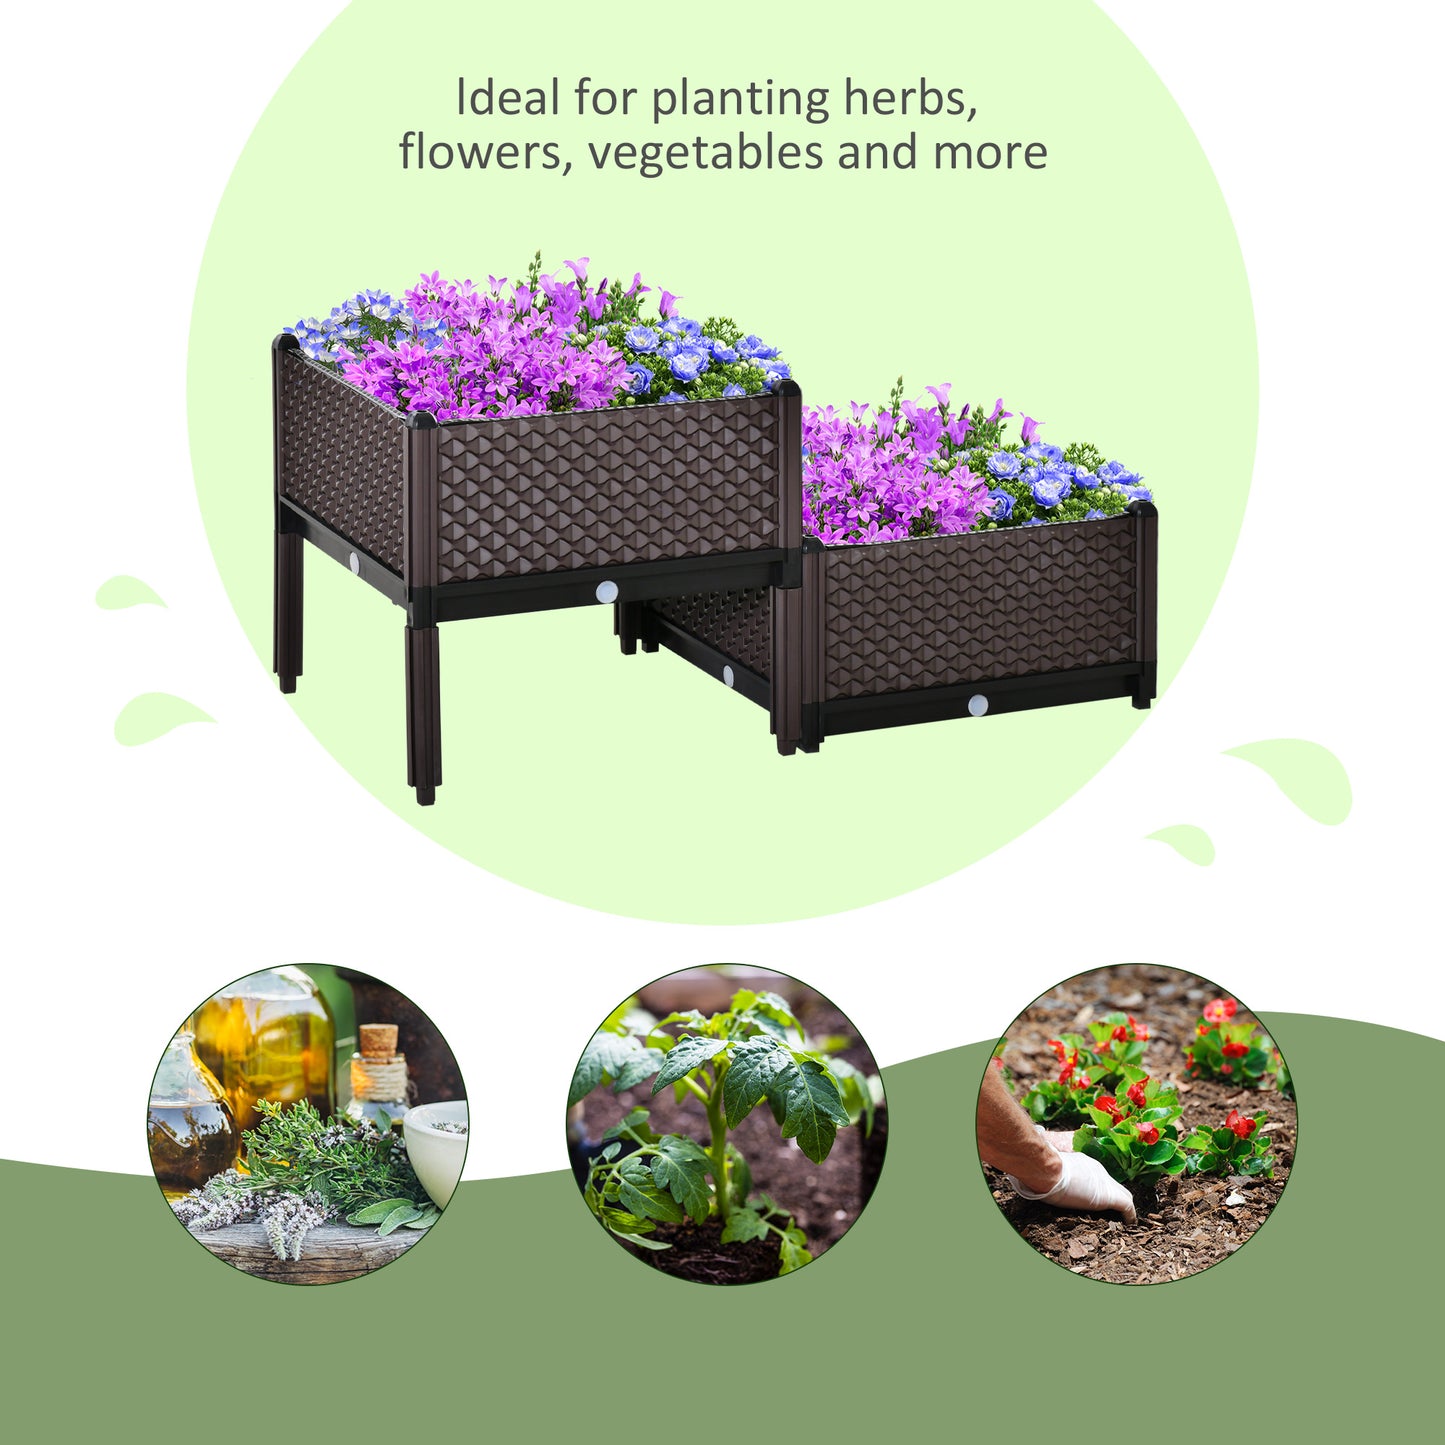 Outsunny 50cm x 50cm x 46.5cm Set of 2 Plastic Raised Garden Bed, Planter Box, Flower Vegetables Planting Container with Self-Watering Design